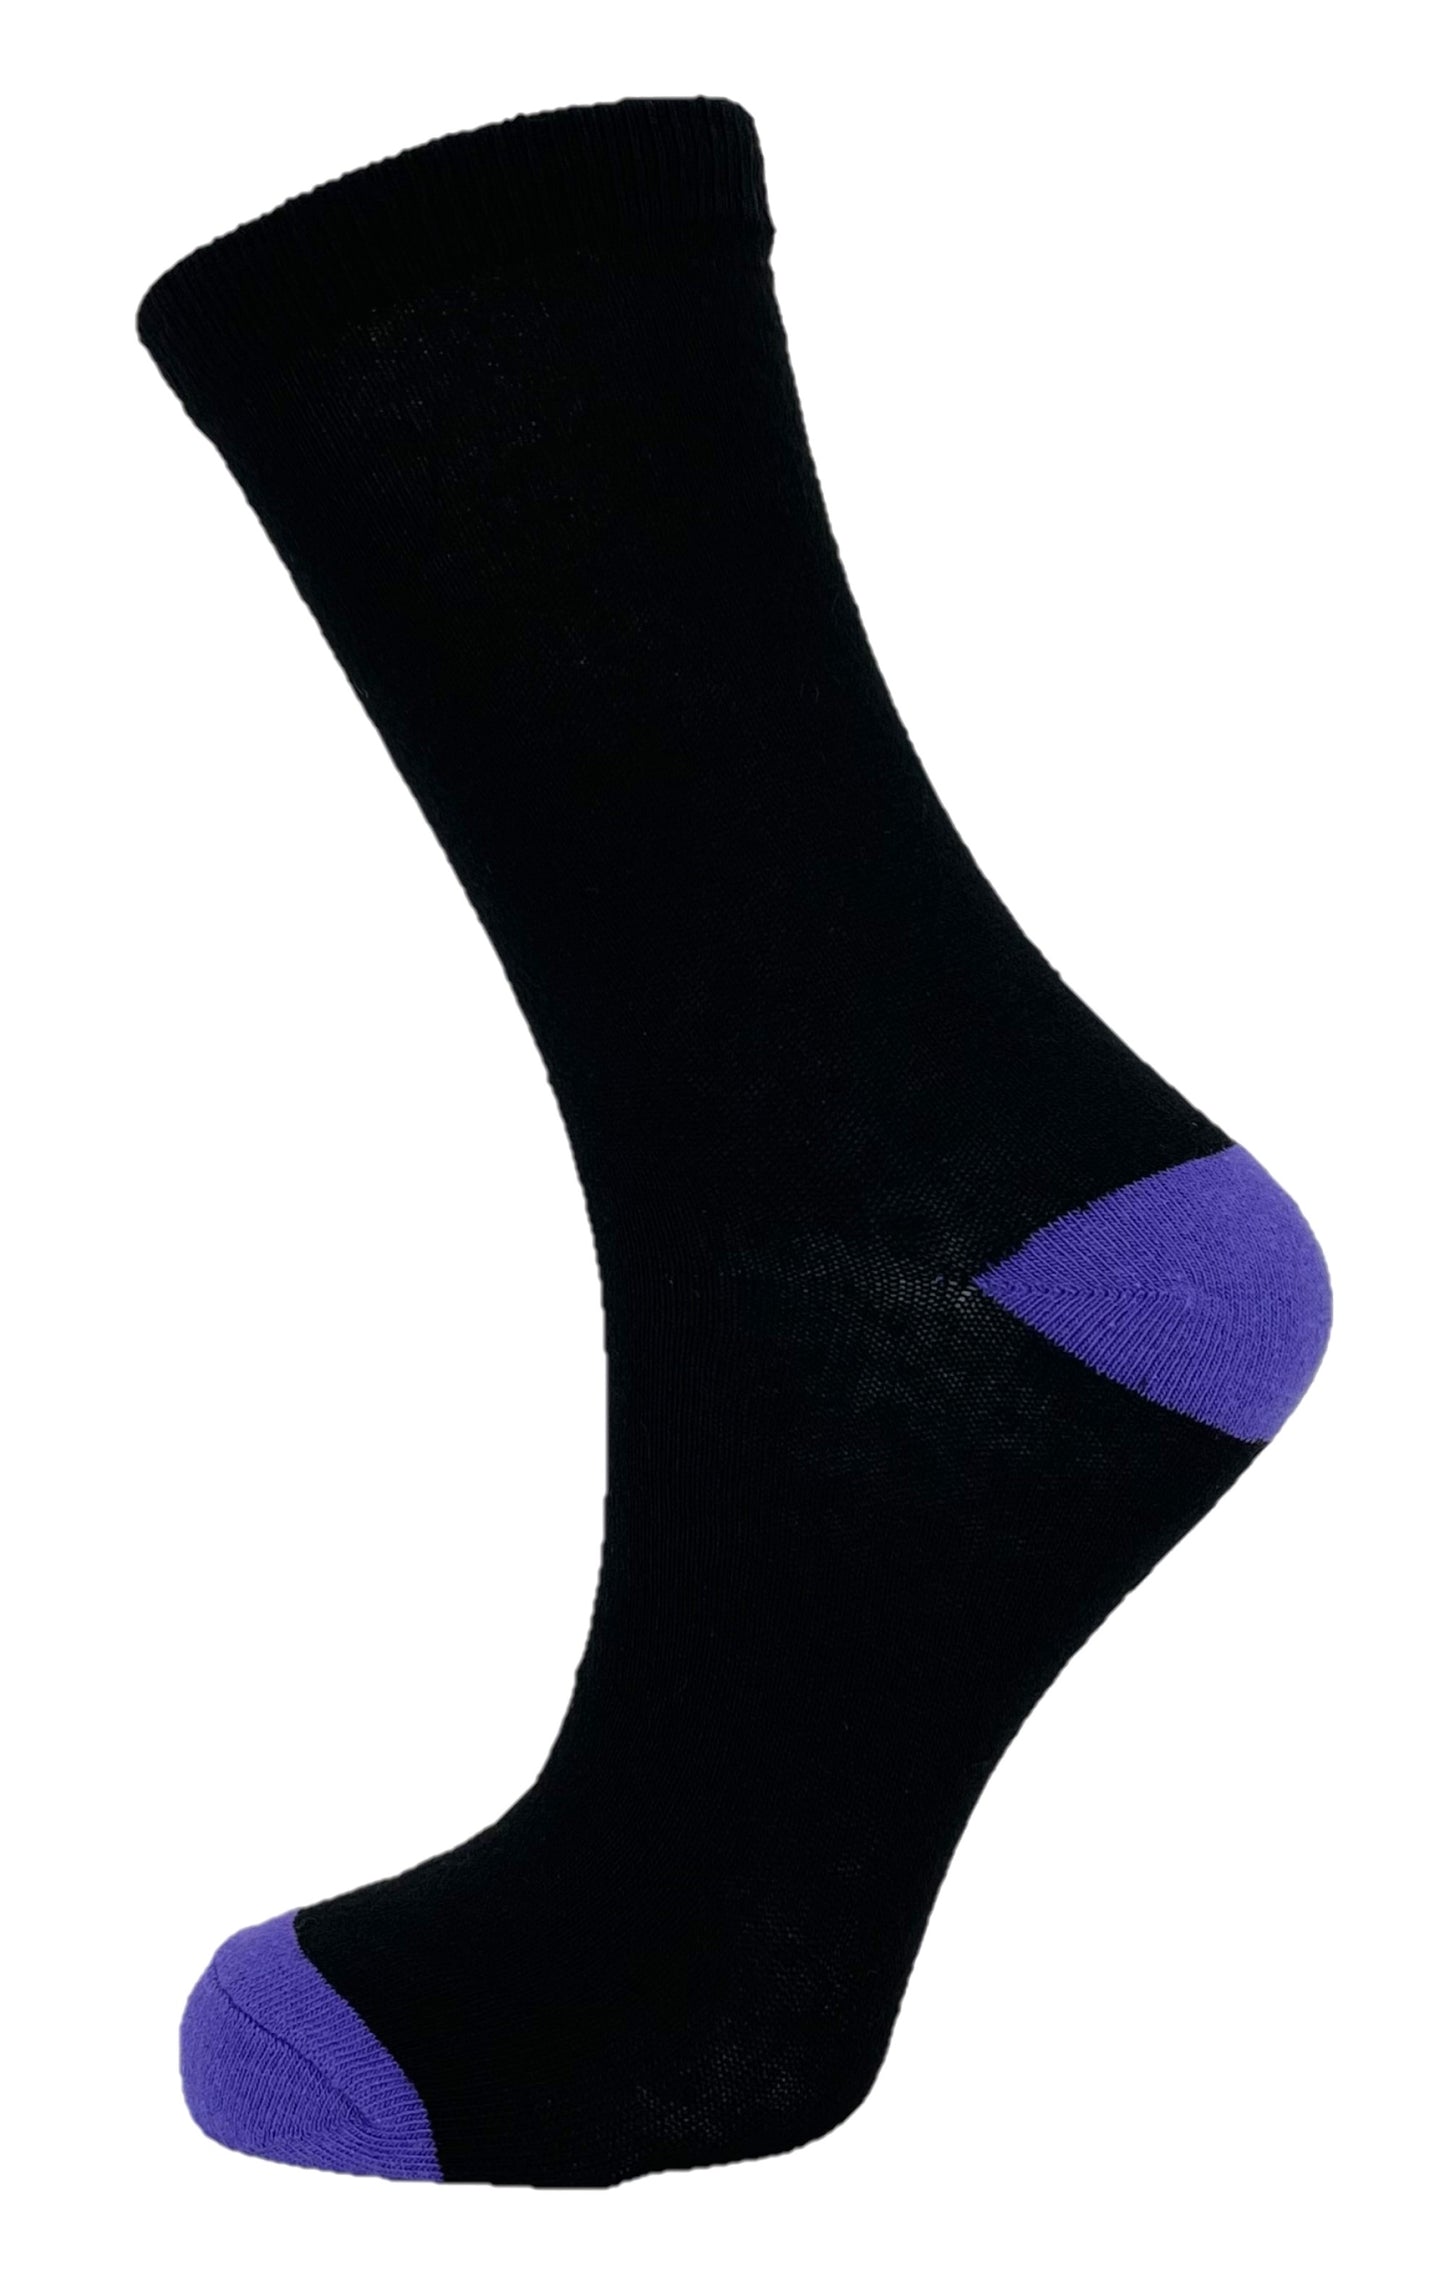 5 Pairs Ladies Cotton Rich Black and Multicoloured Ankle Socks - UK 4-7